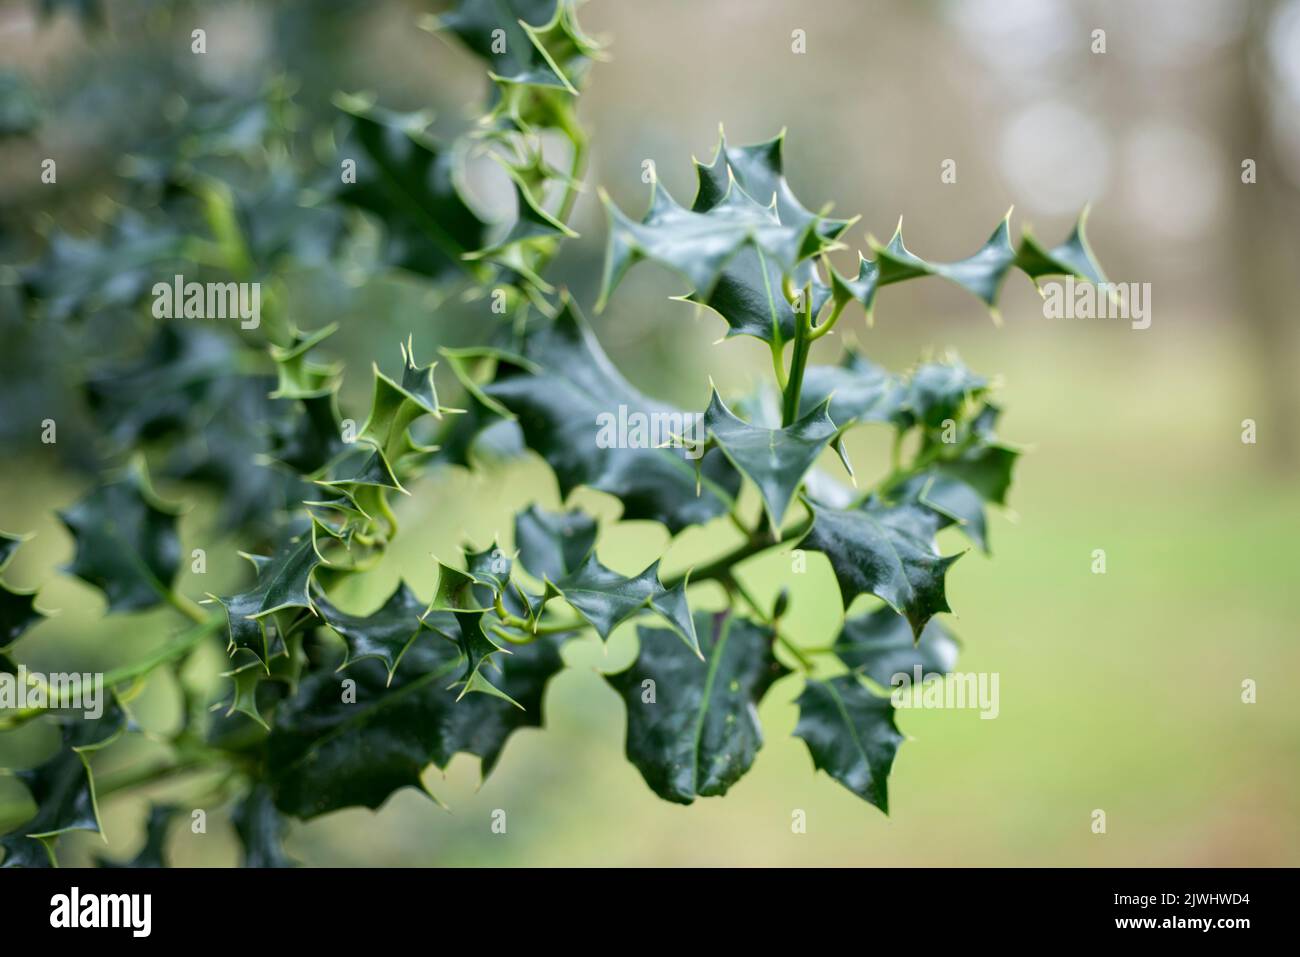 Close up view of the spiky leaves of the holly bush plant with blurred background in a rural area in the countryside on England UK Stock Photo